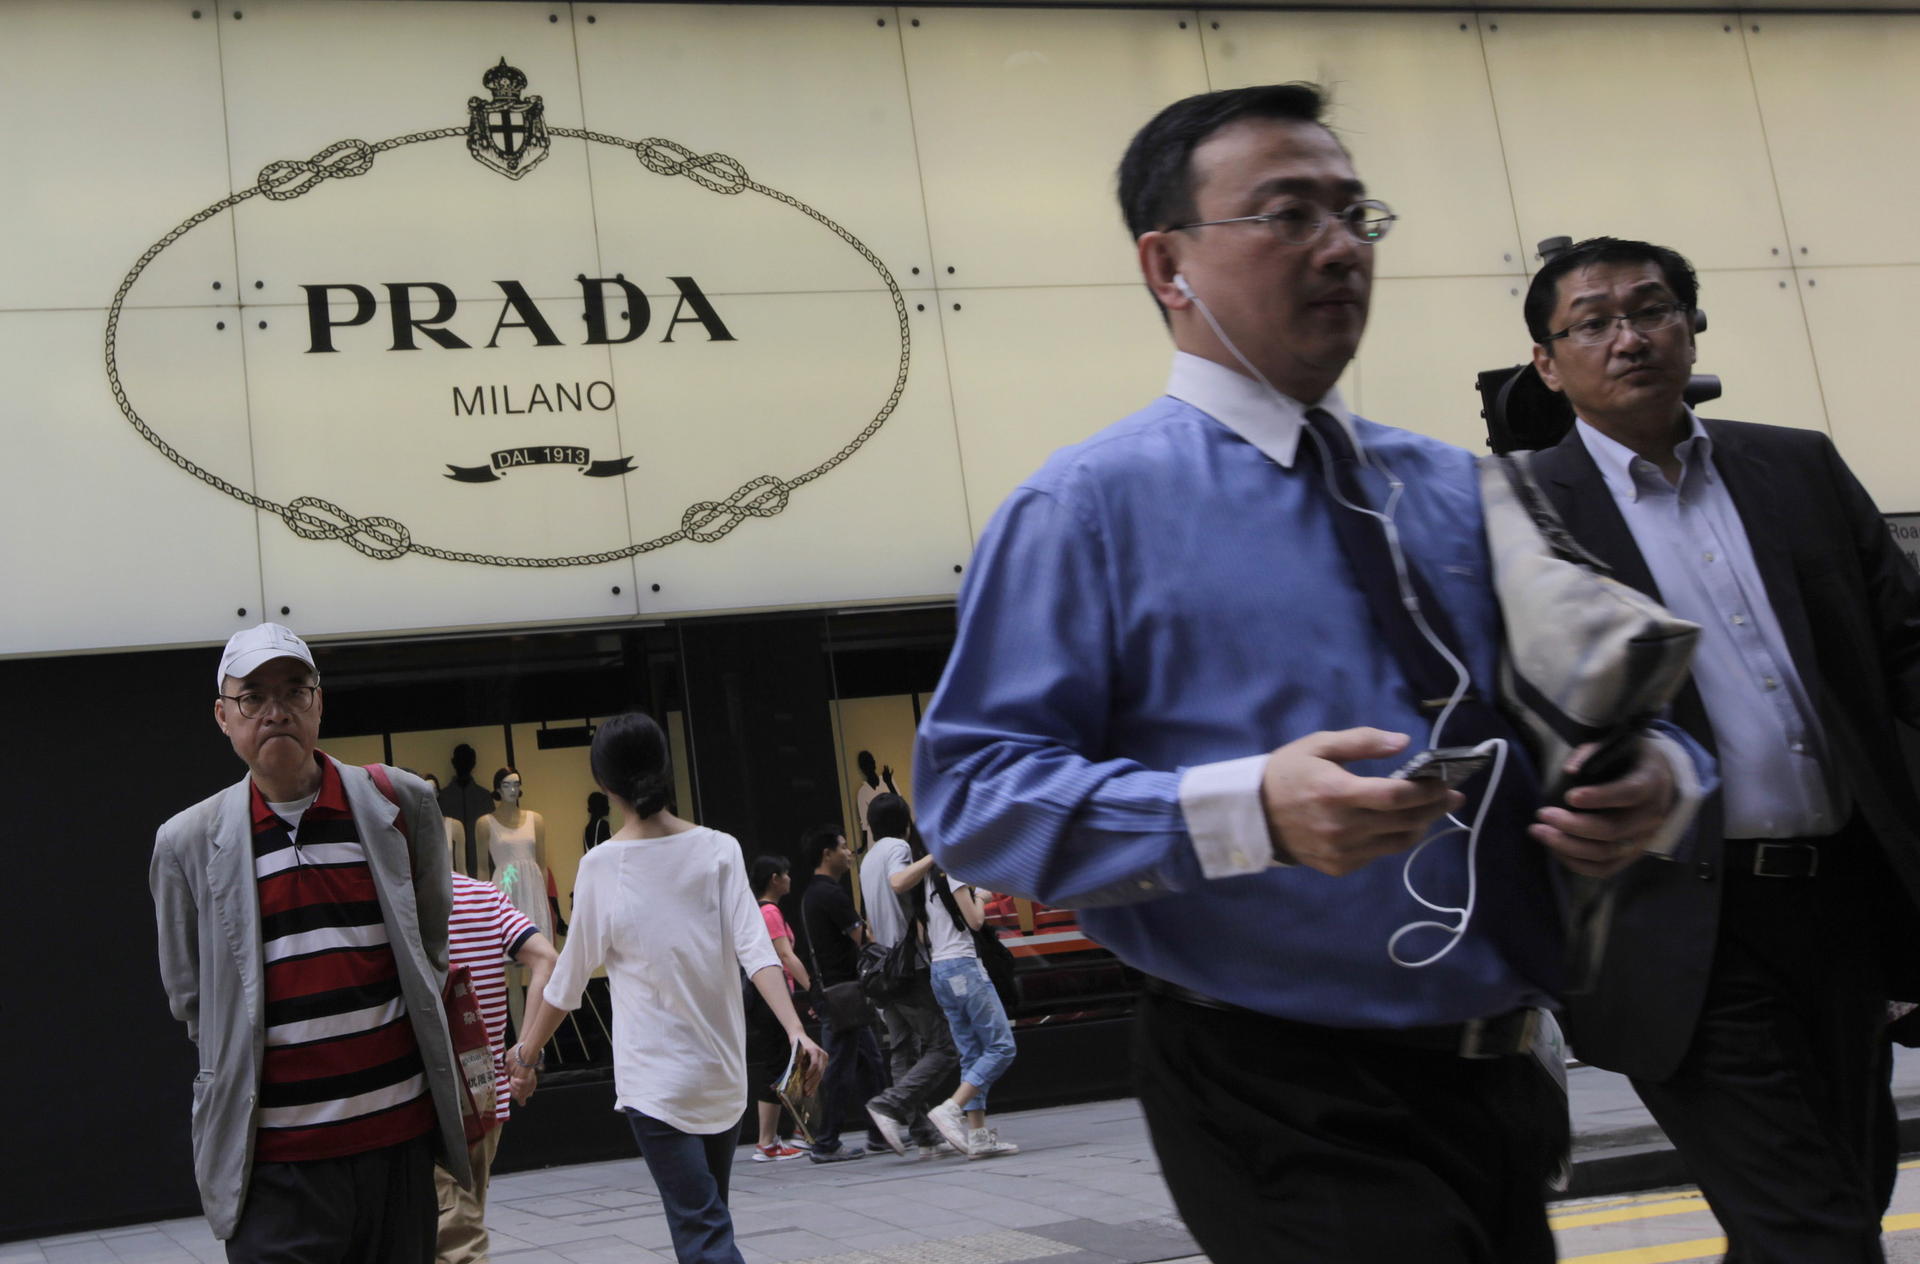 Prada said the decline in Asia sales originated in Hong Kong and Macau where 'market conditions deteriorated significantly'. Photo: EPA